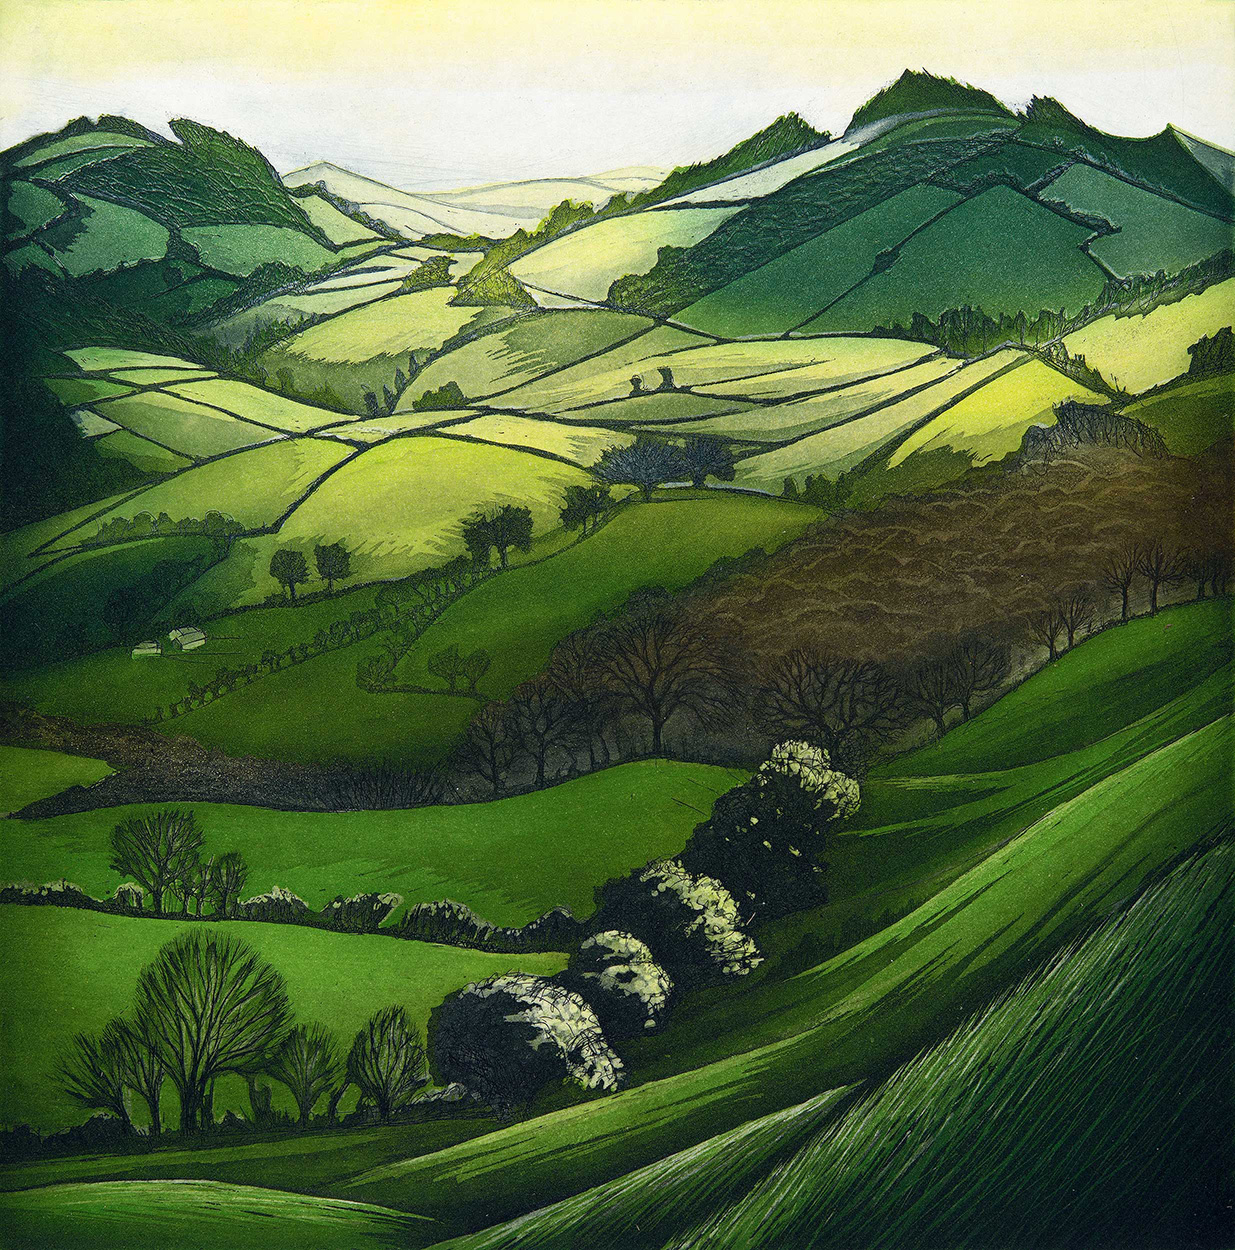 'The Dancing Hills' by Morna Rhys